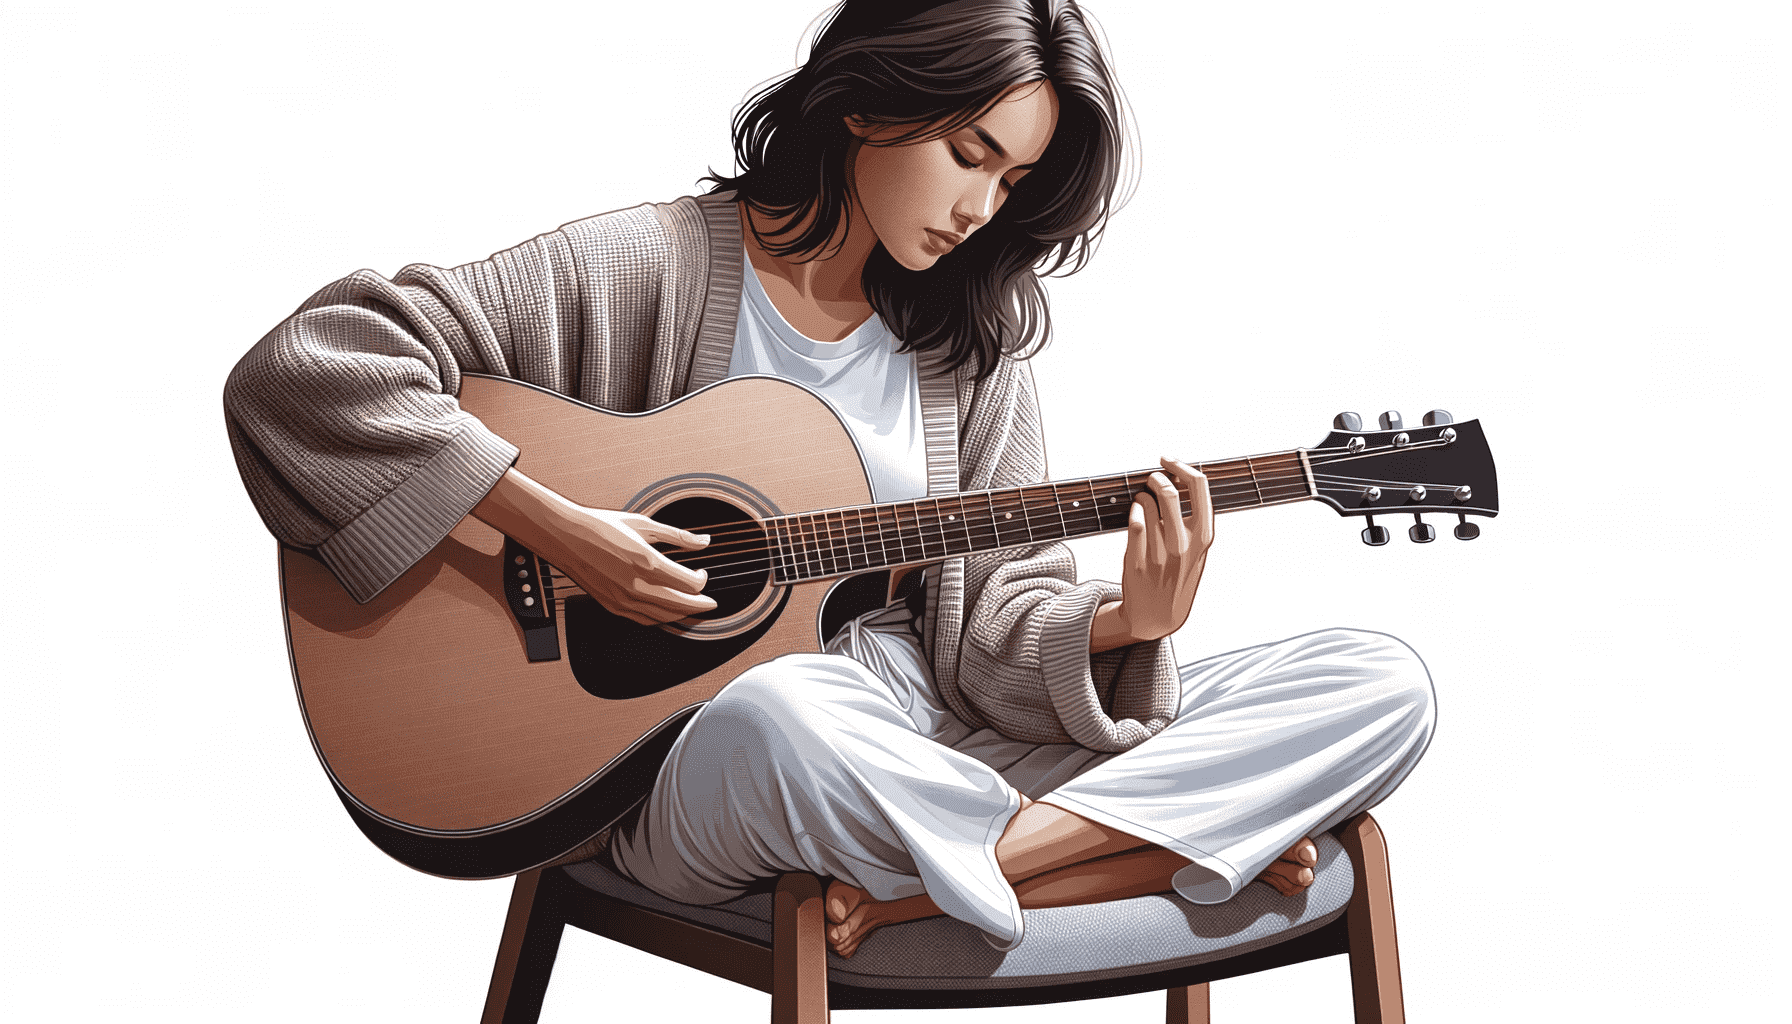 Girl Playing a Musical Instrument (hobby)